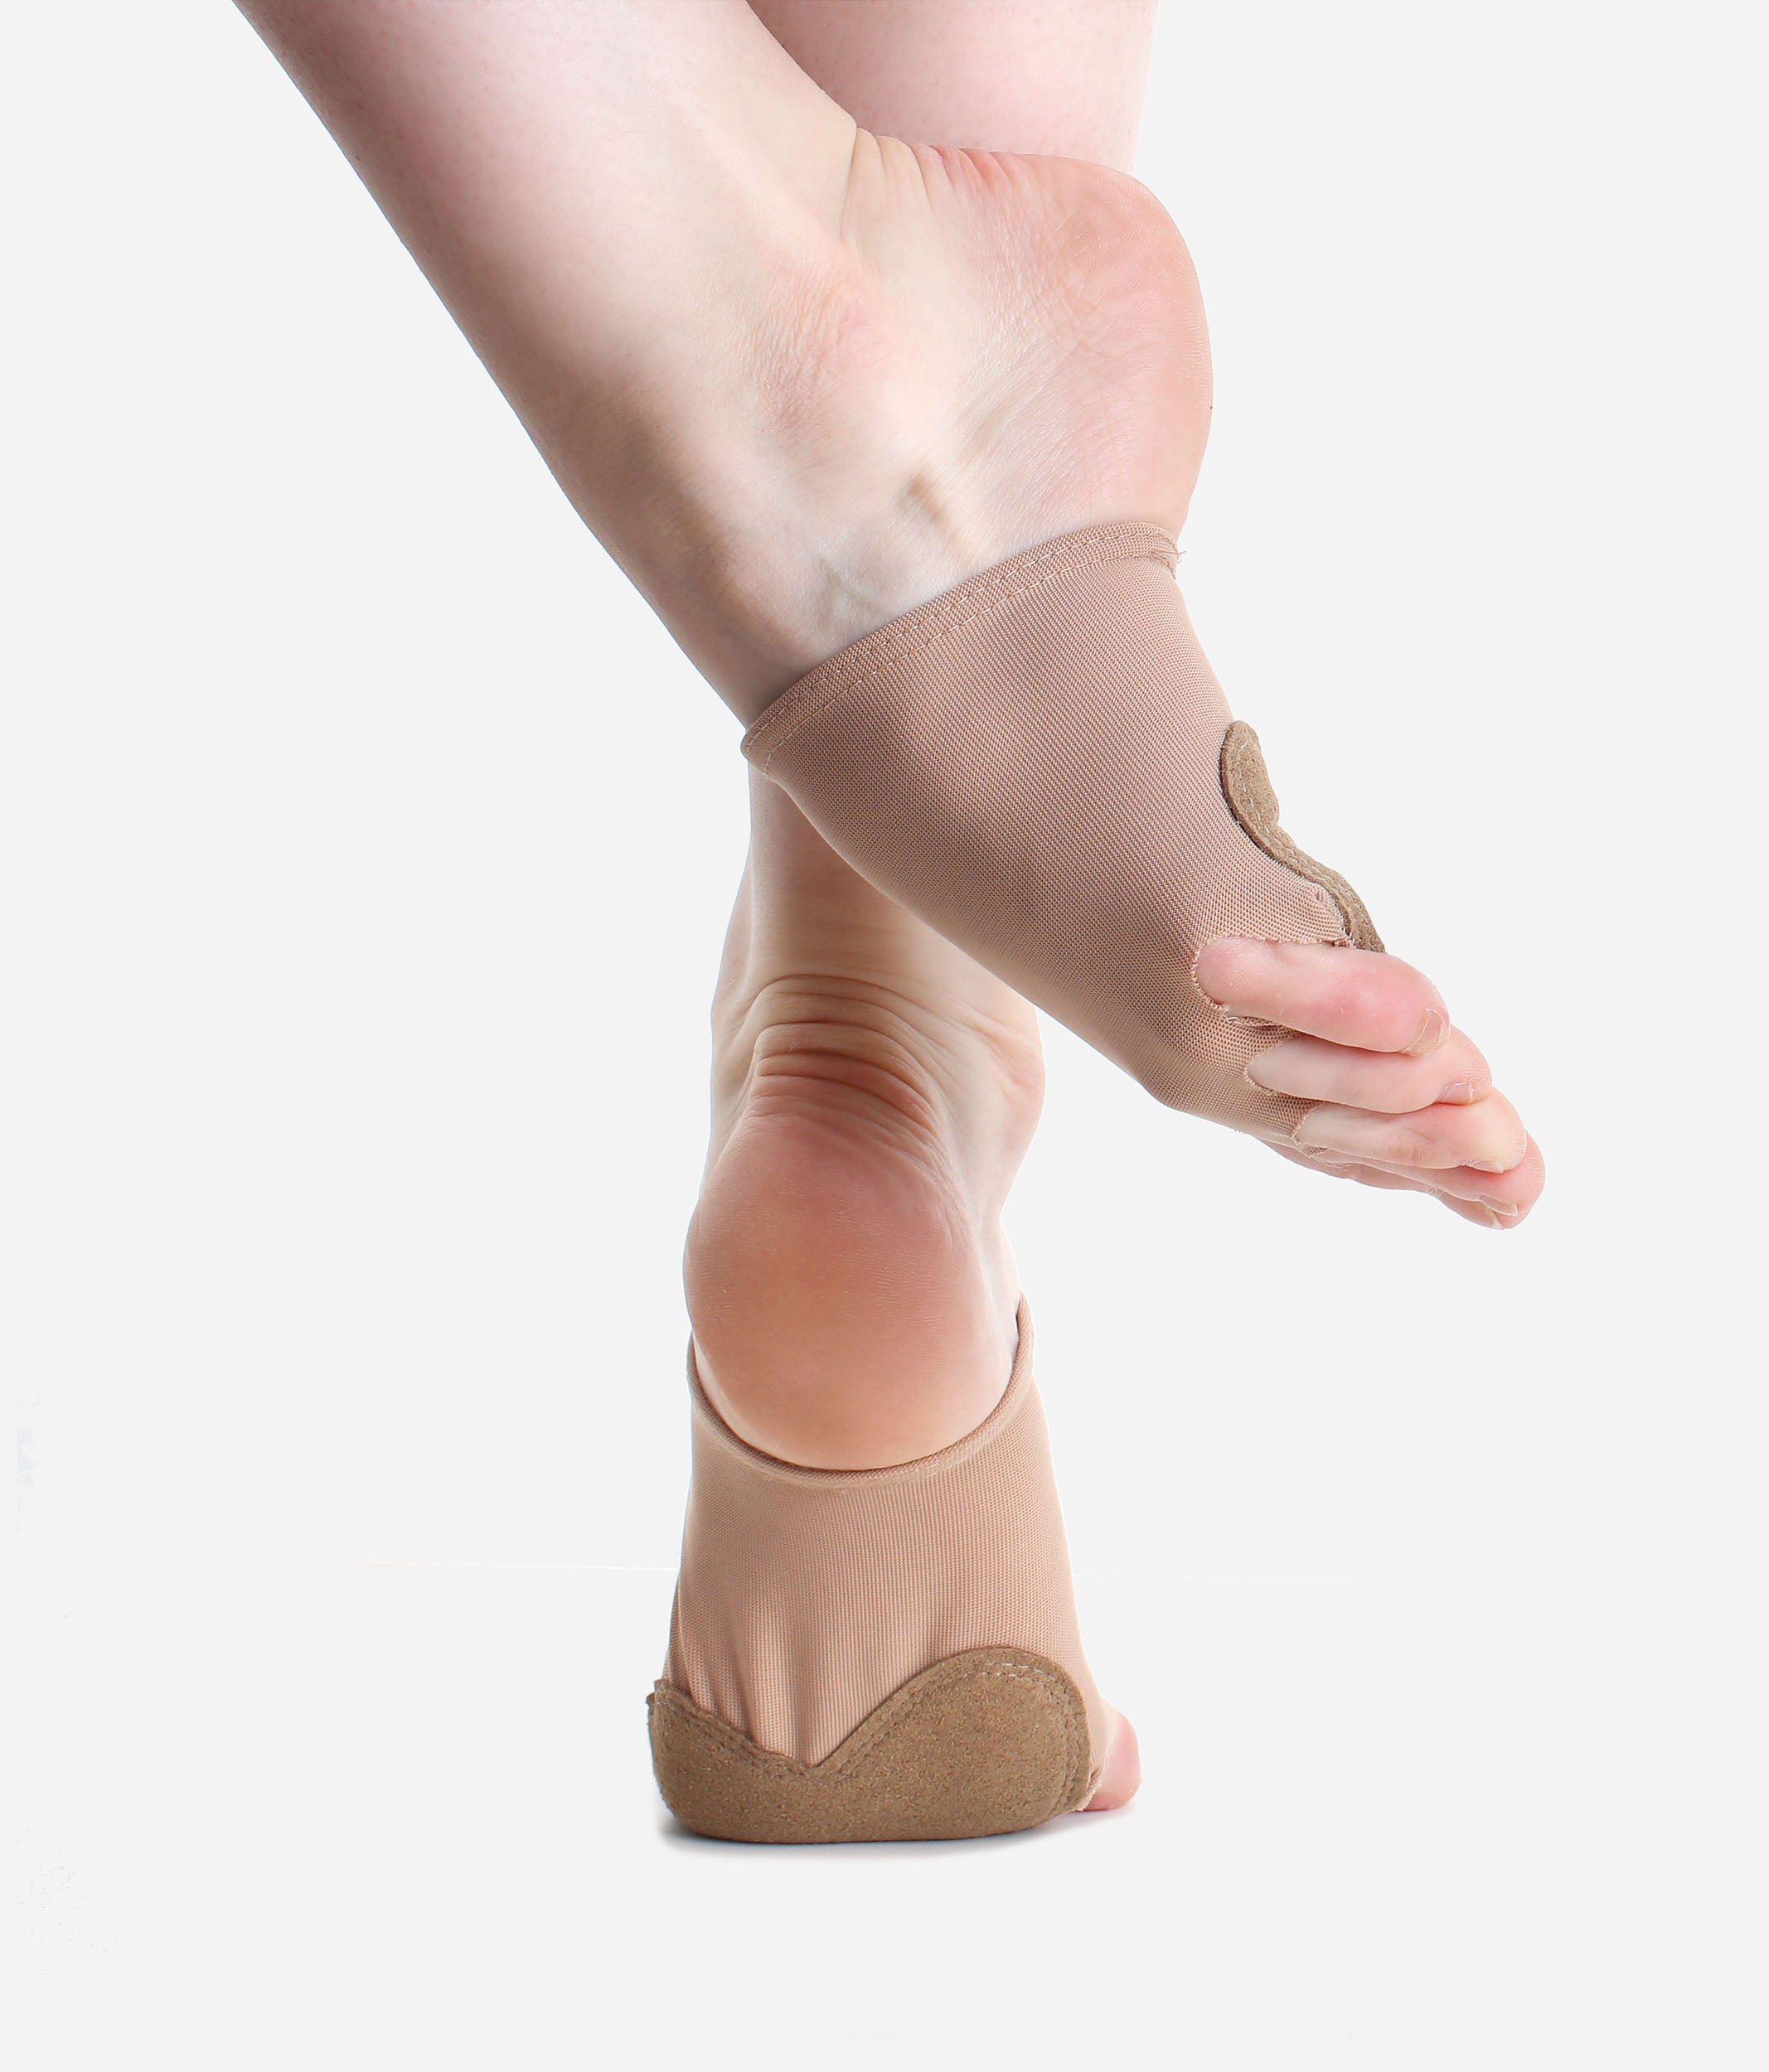 Contemporary Dance Foot Glove - MD 18